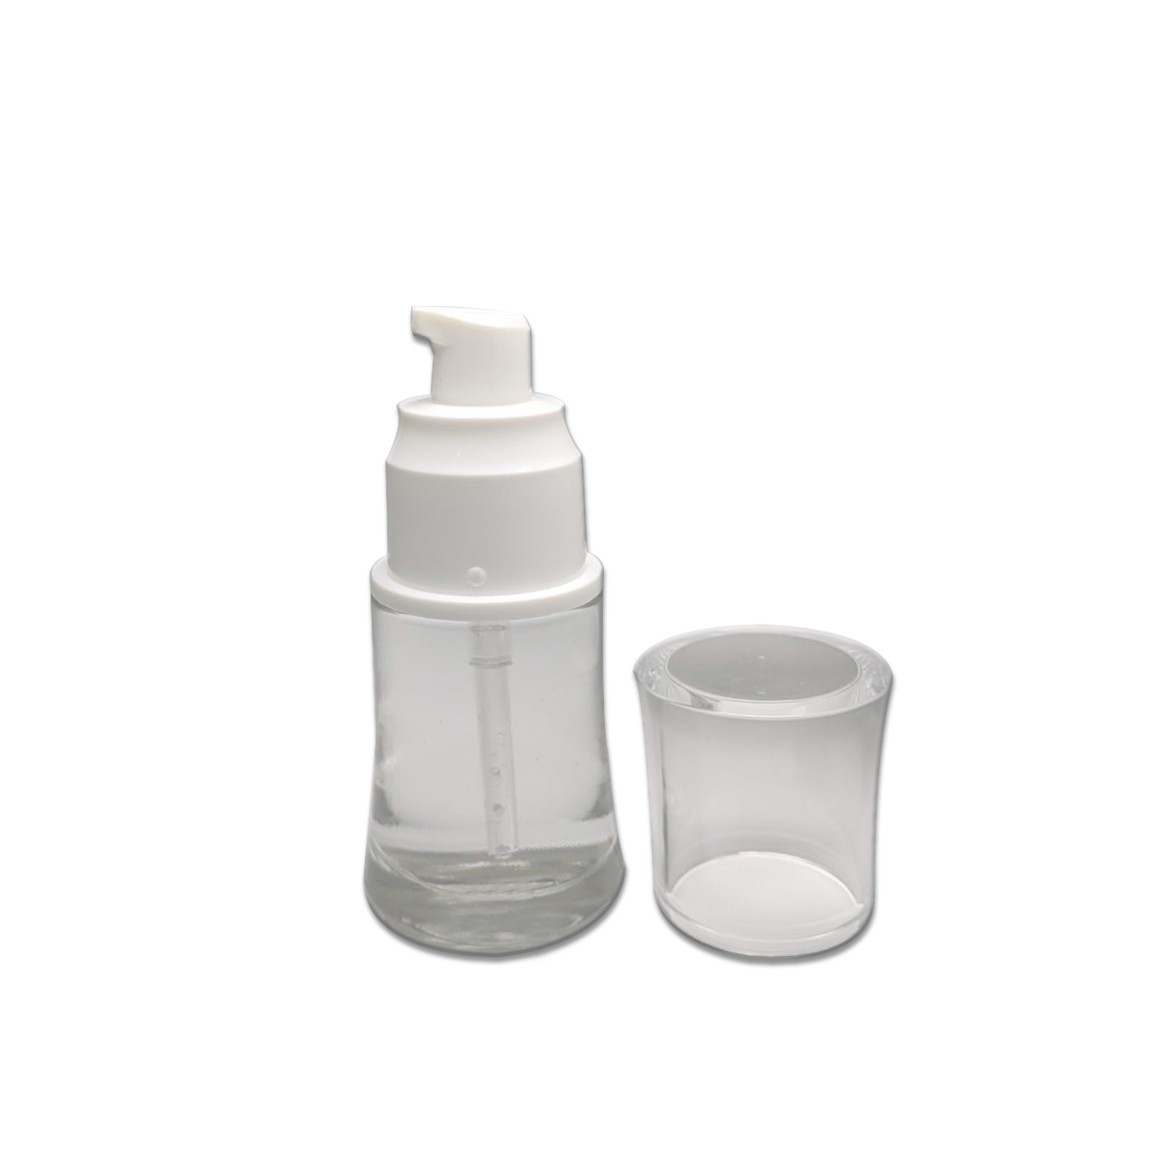 Unique shape glass bottle 30ml capacity 20/410 neck size lotion pump for foundation and skincare packaging